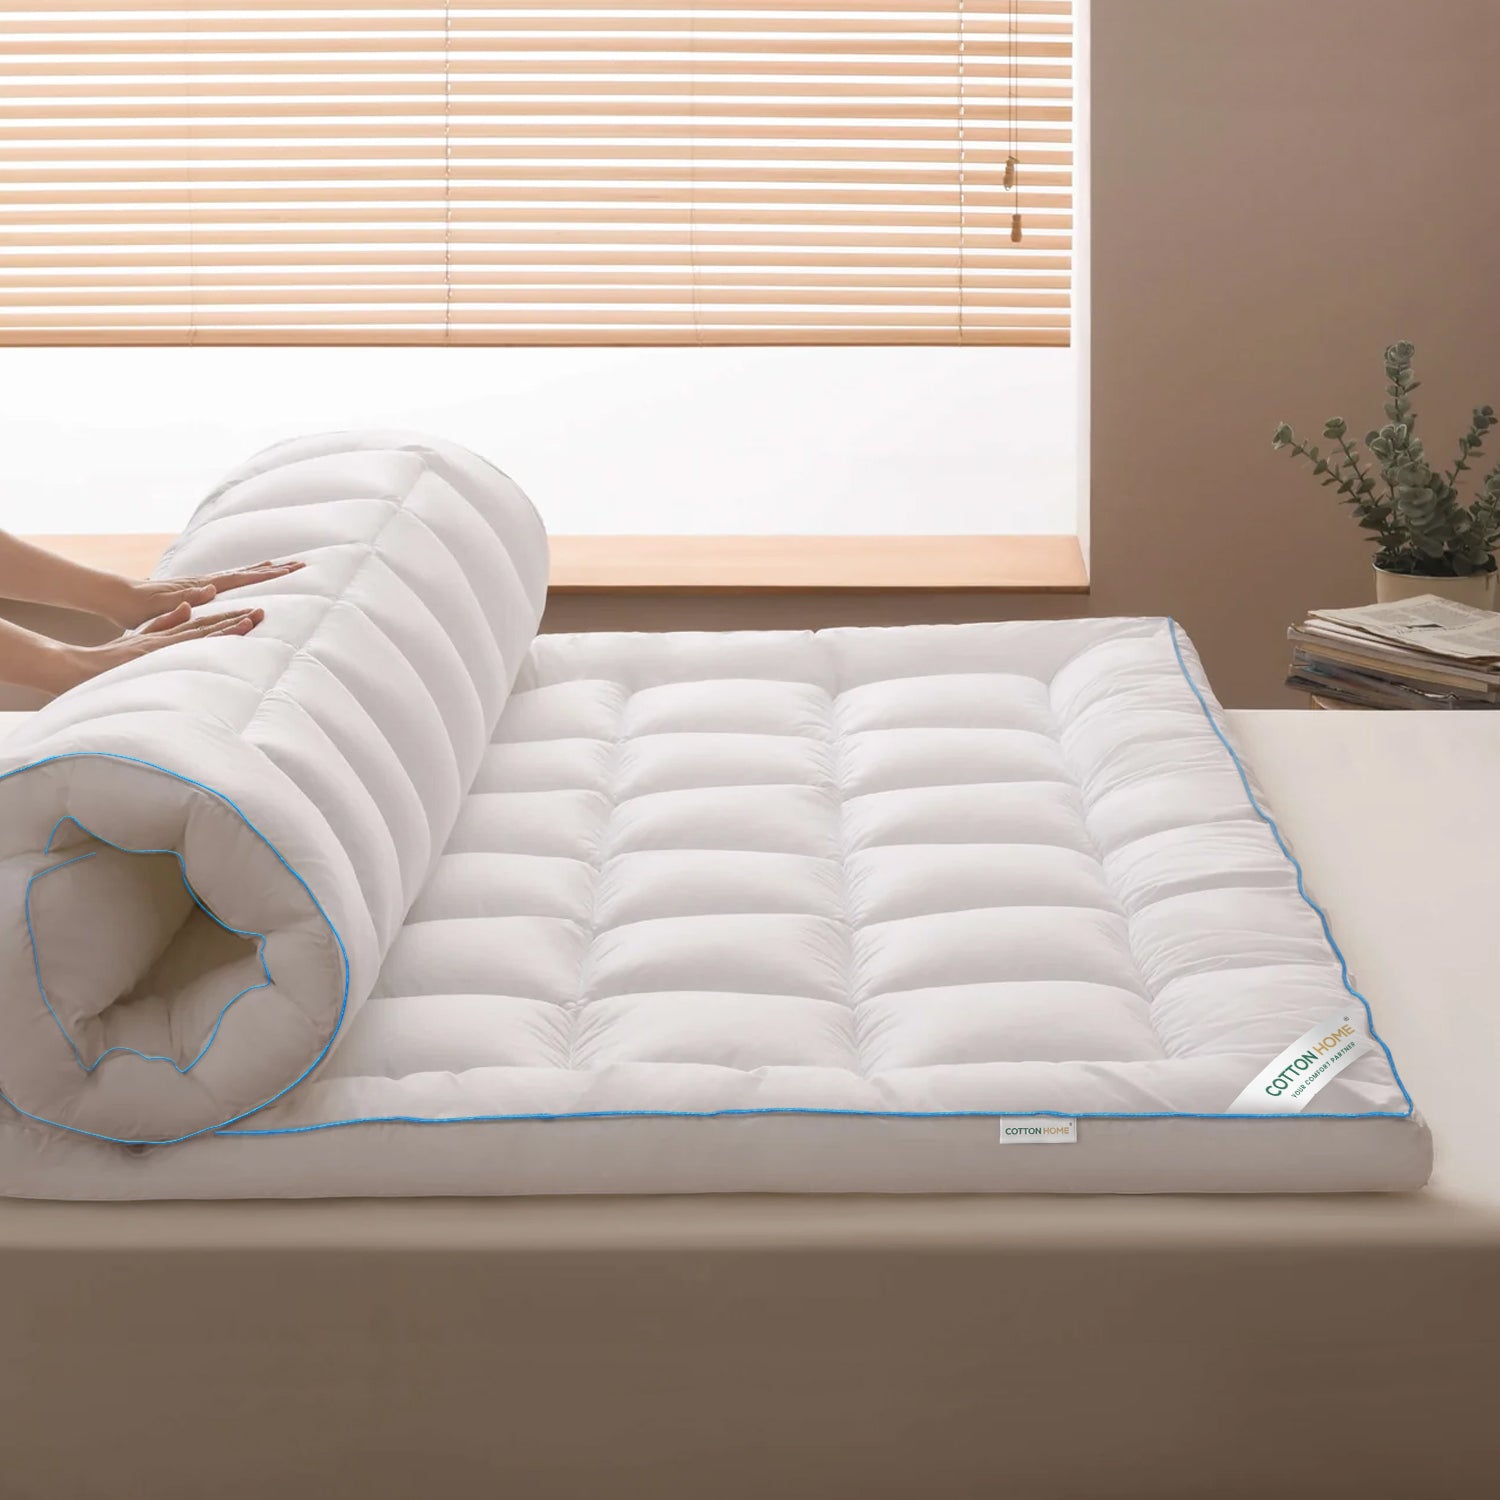 Gel Mattress Topper 8cm Thickness - 120x200cm White with Blue Cord